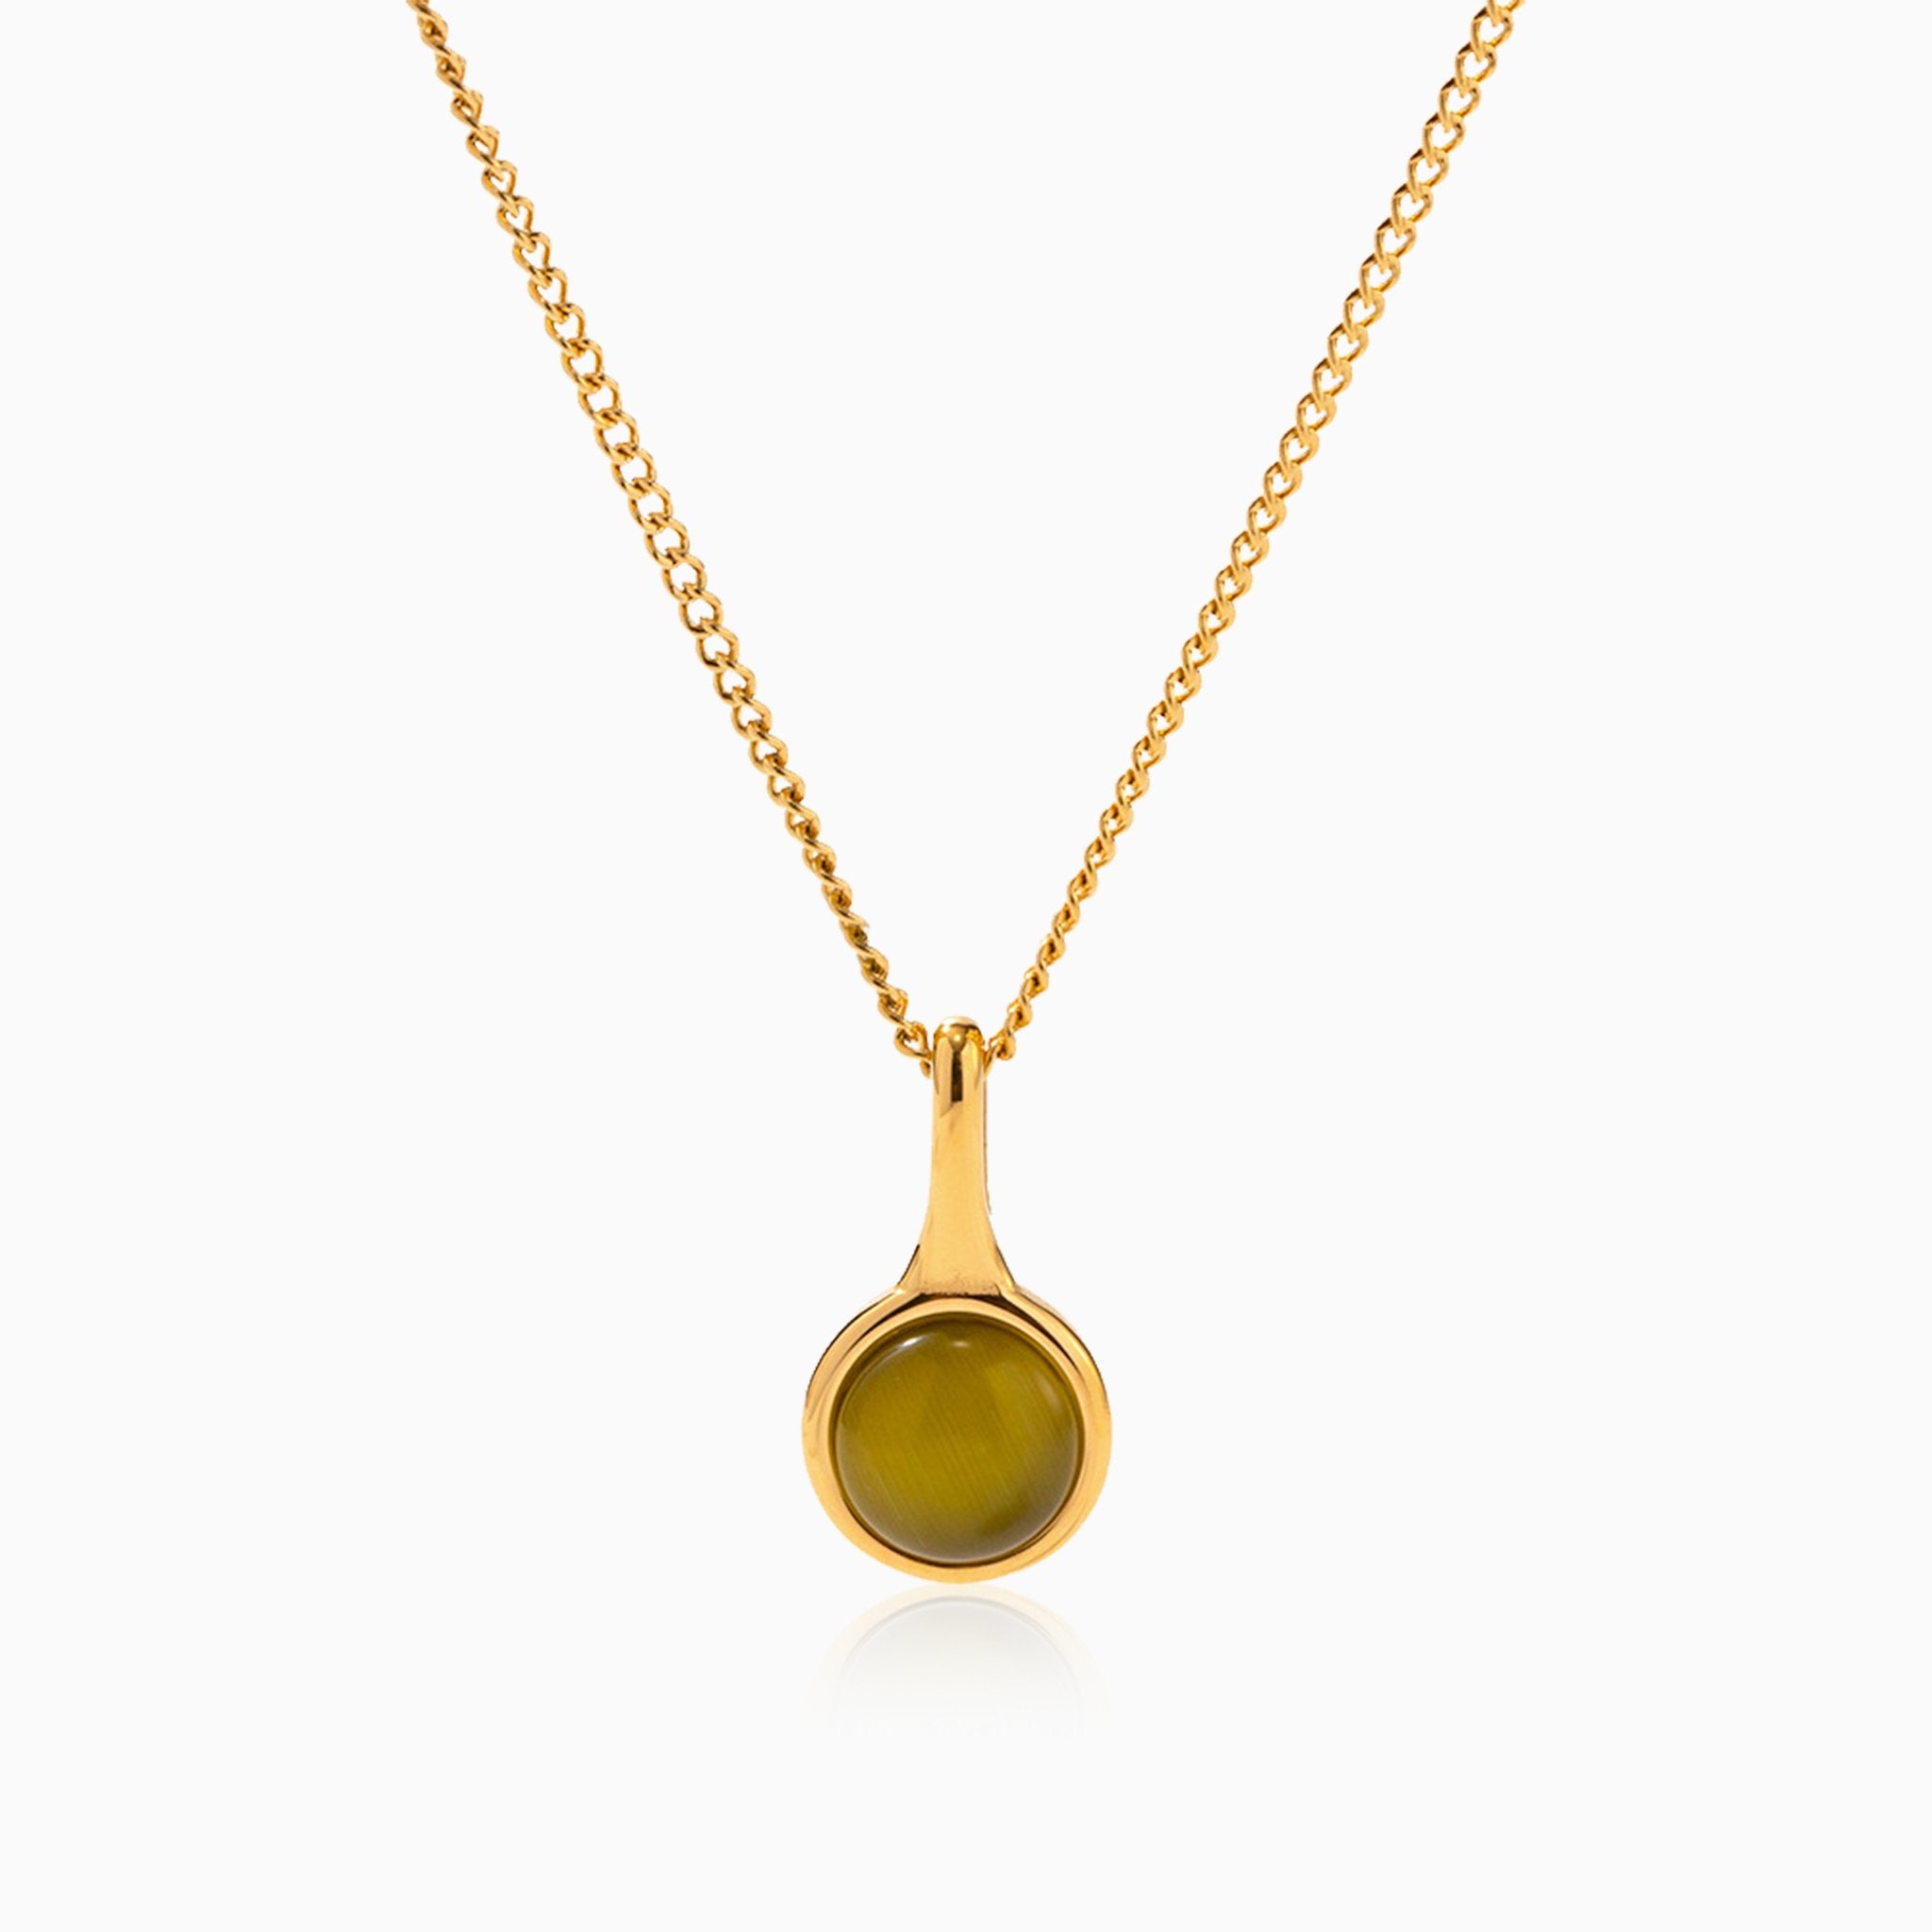 Olive Green Opal Pendant Necklace - Nobbier - Necklace - 18K Gold And Titanium PVD Coated Jewelry